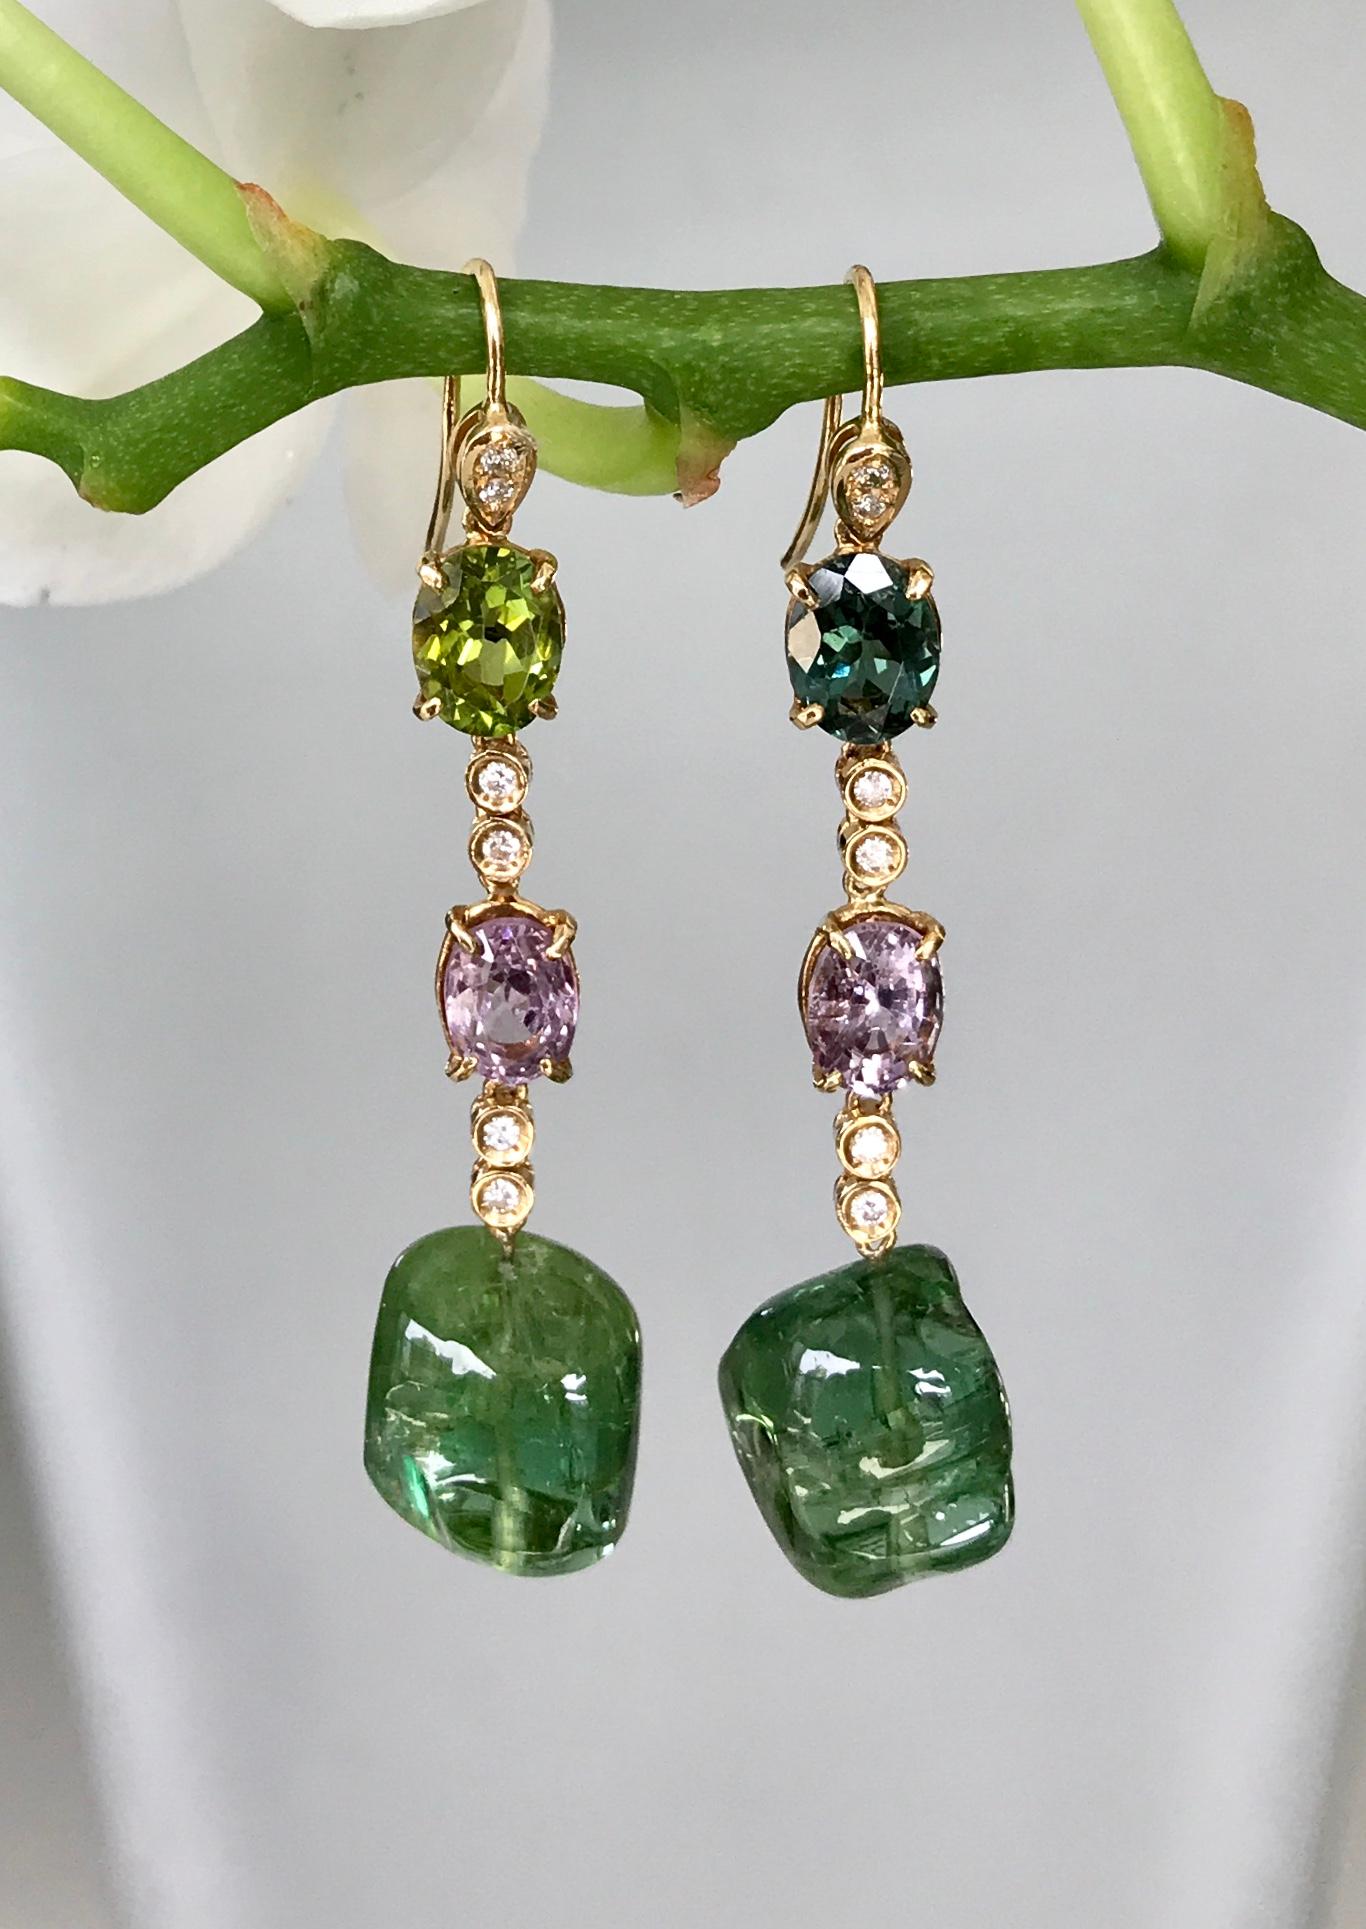 One-of-a-kind drop earrings of green tourmaline nuggets, faceted spinels and tourmalines, and white diamonds, handcrafted in 18 karat yellow gold. 

These unusual tourmaline nuggets are beautifully natural in form and are vibrant shades of